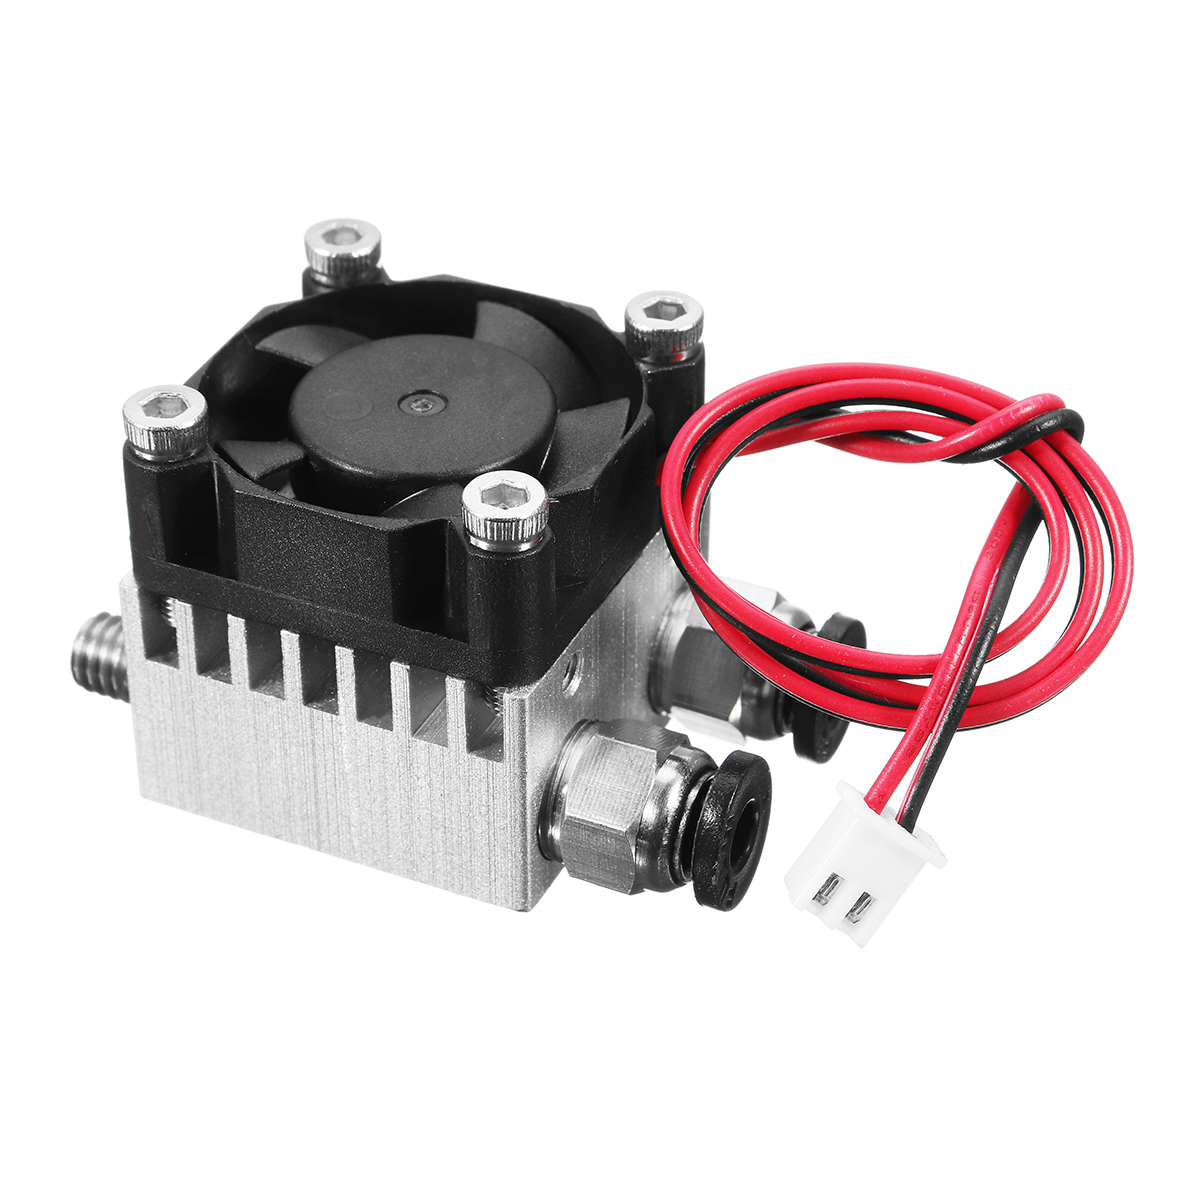 1.75mm/3.0mm Fialment 0.4mm Nozzle Upgraded Dual Head Extruder Kit for 3D Printer 18